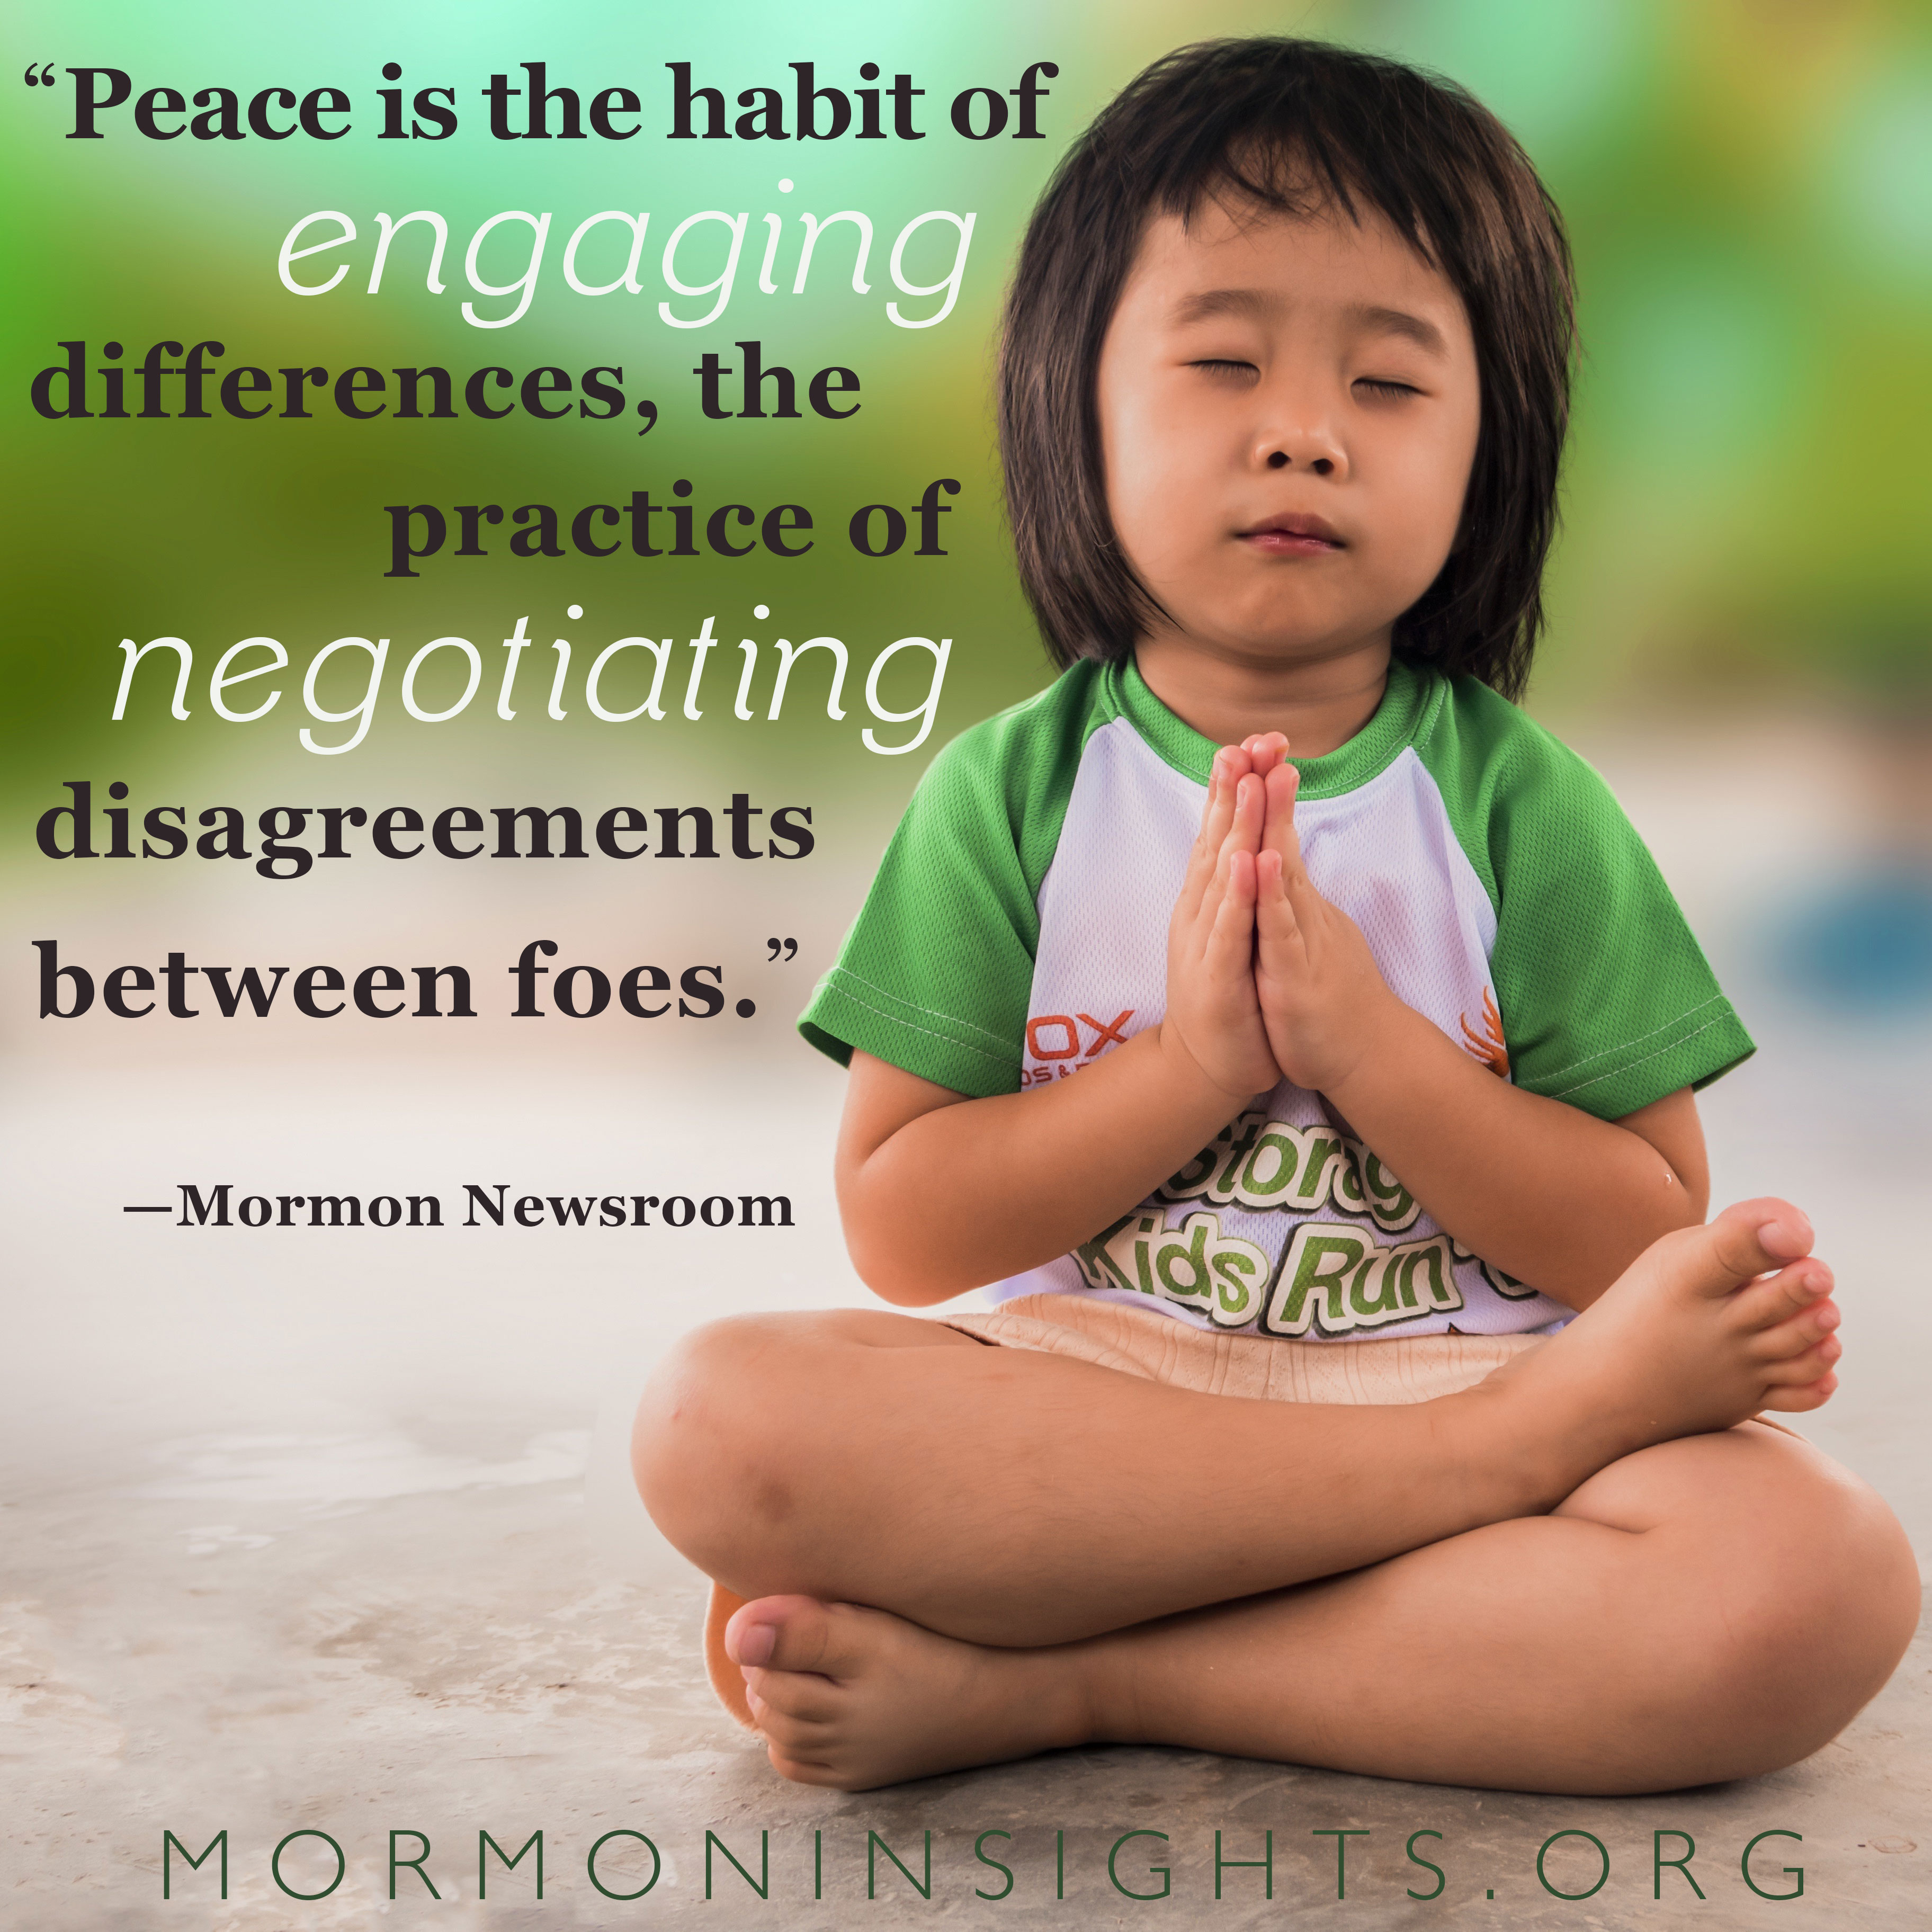 "Peace is the habit of engaging differences, the practice of negotiating disagreements between foes."